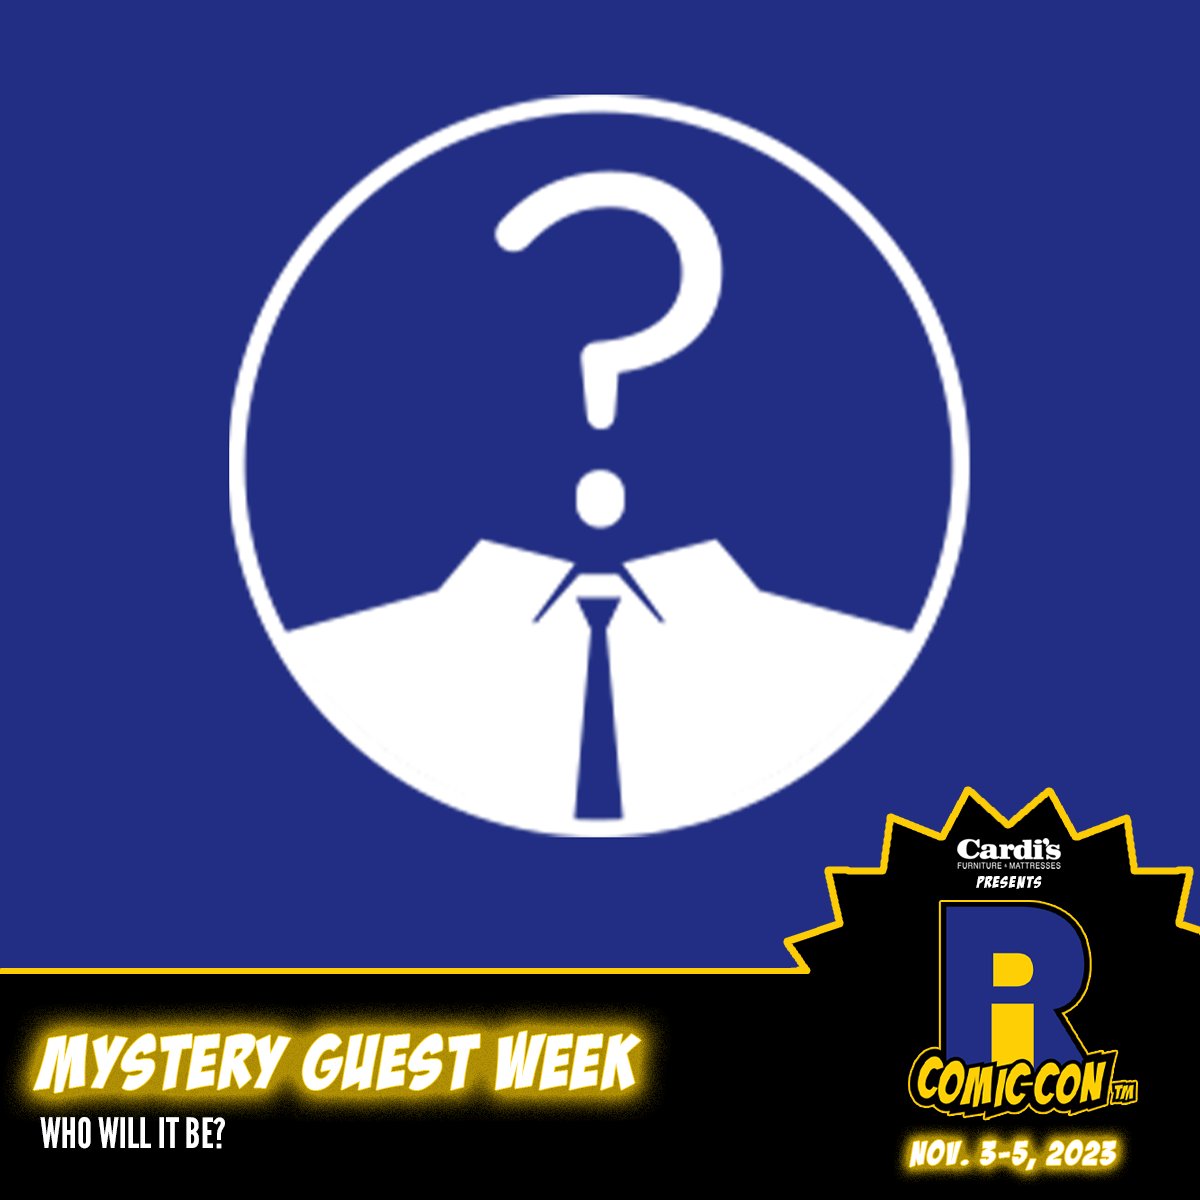 It's another theme week, but this one's a mystery... Each day, a new guest is announced, but each one is not connected to the other. Come back each day at 11 am to see who it is. #mysteryguest #surprisesurprise